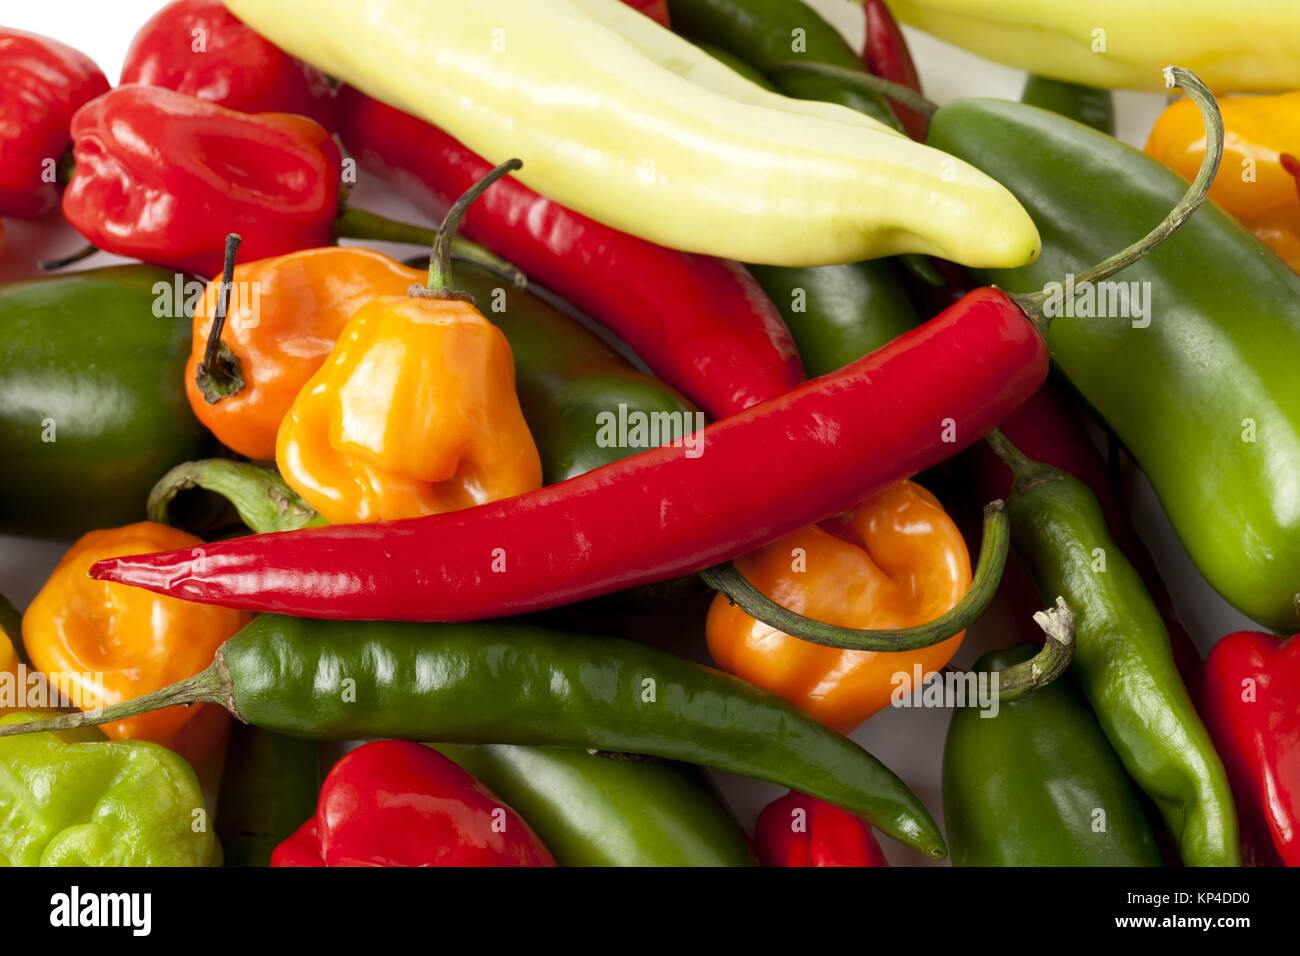 bunch of assorted kinds of chili peppers Stock Photo